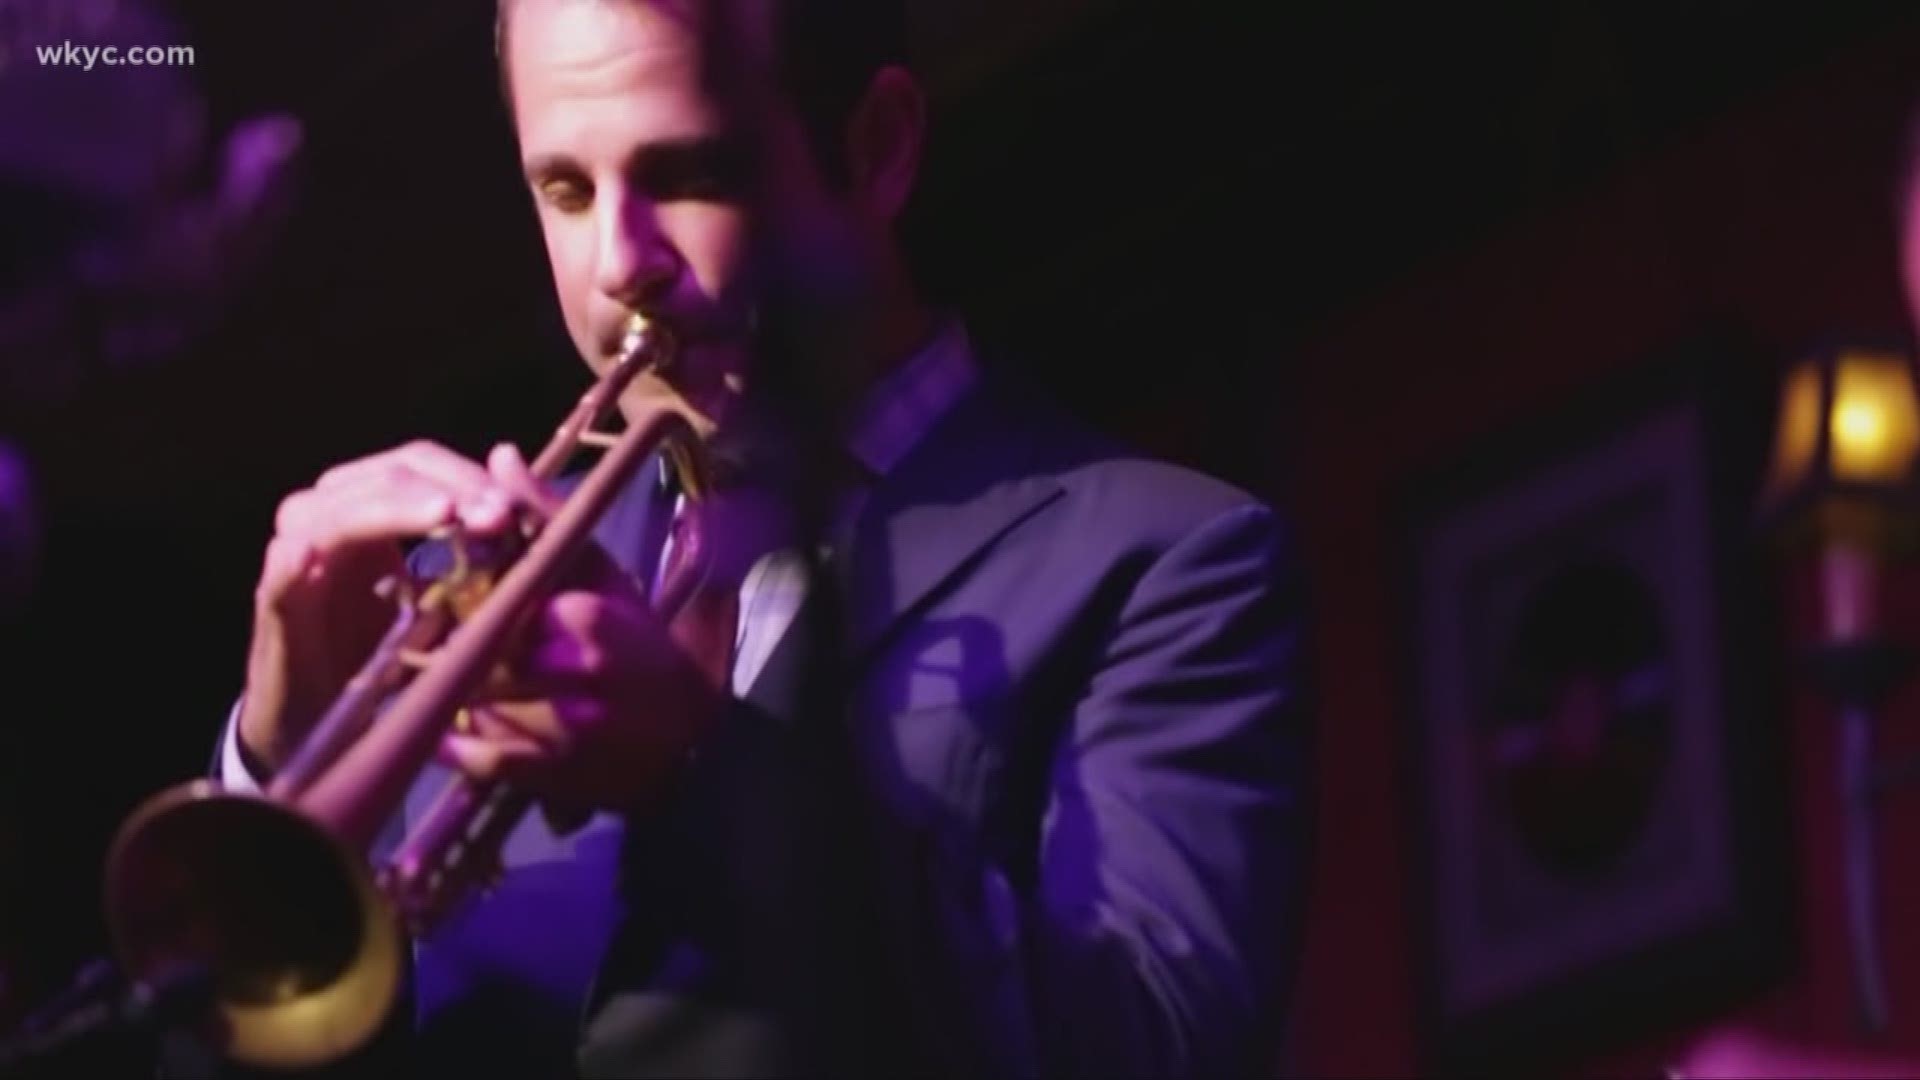 Tri-C JazzFest Director Dominick Farinacci discussed his love for teaching and music. Check out the 40th Tri-C JazzFest this weekend at Playhouse Square.